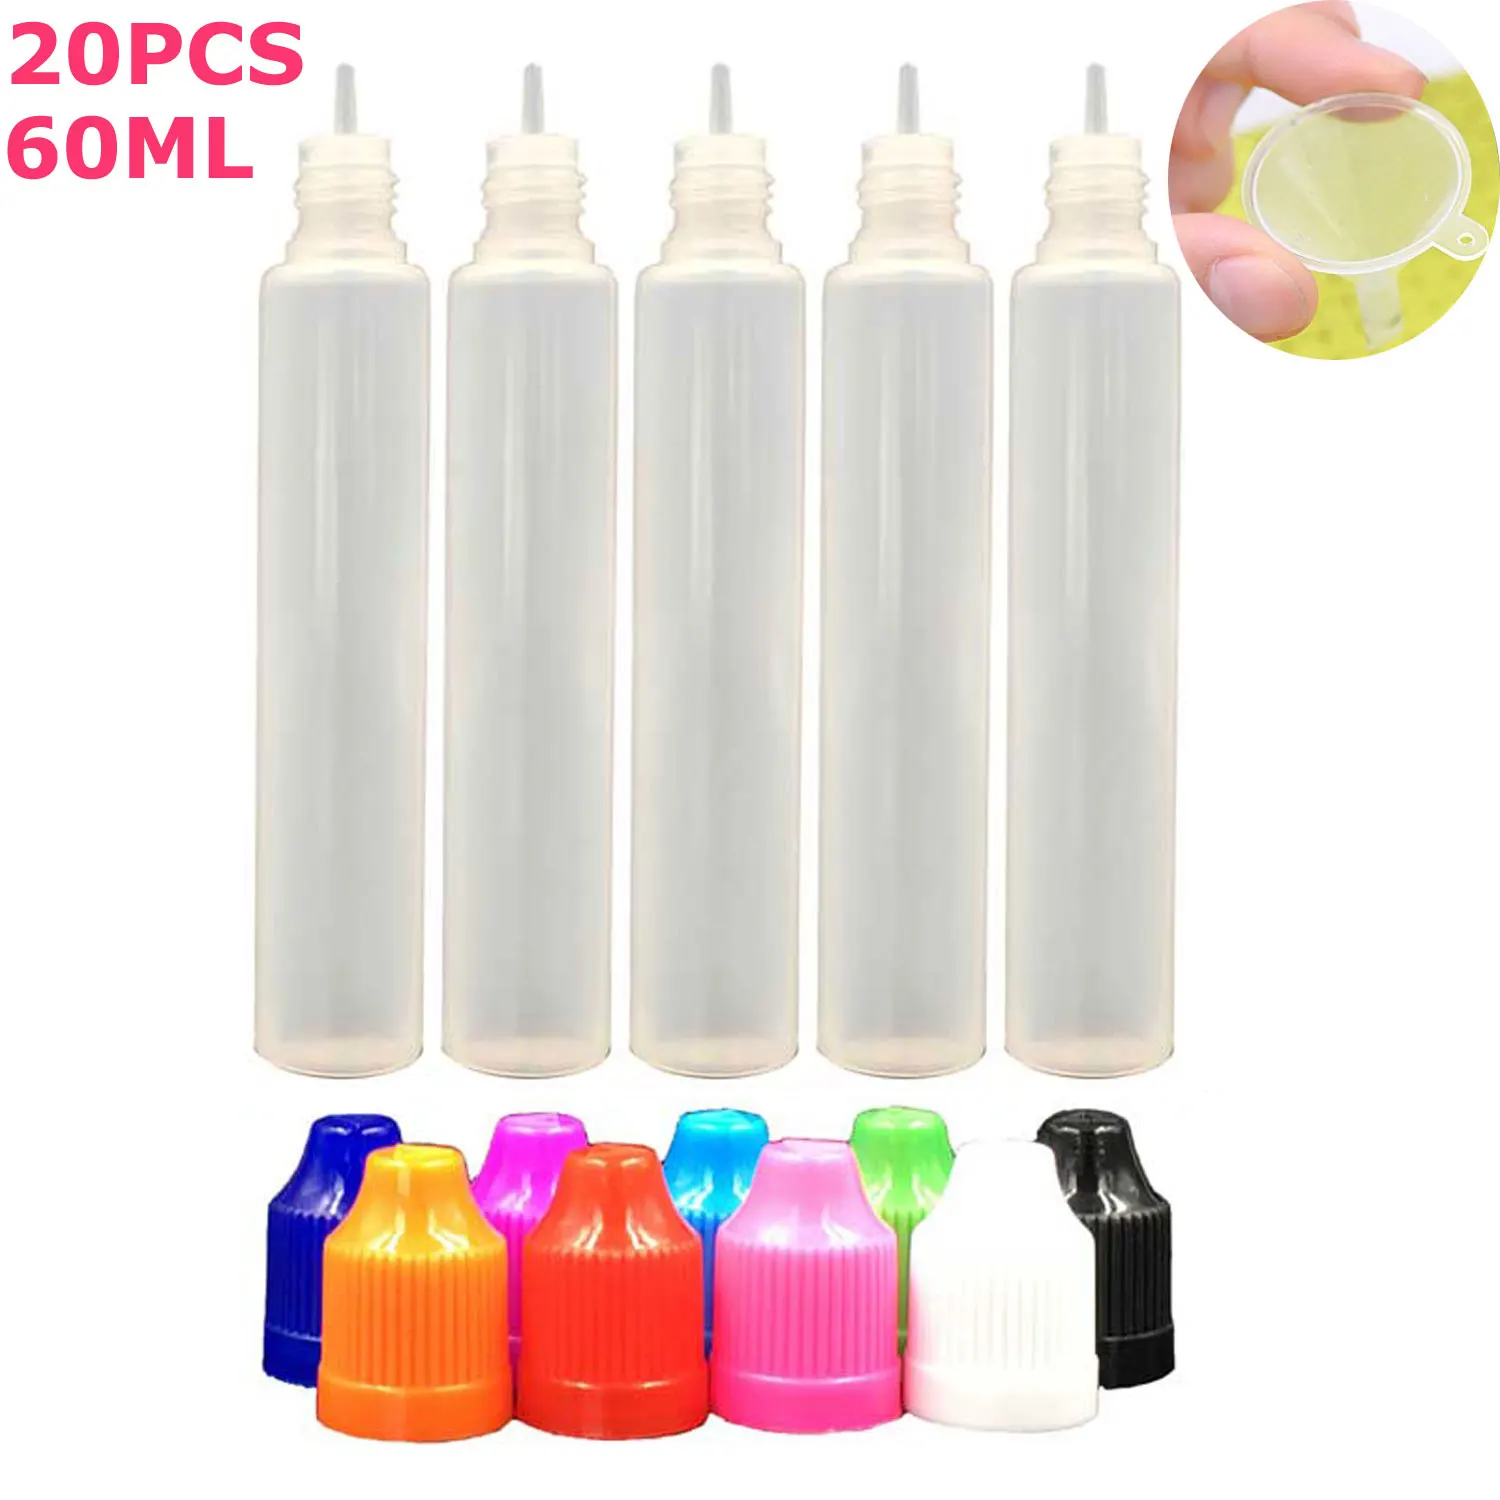 

20PCS X 60ML LDPE Empty Long Pen Shaped Squeezable Liquid E Juice Oli Eye Dropper Bottles Jars Containers with Plastic Caps Tips